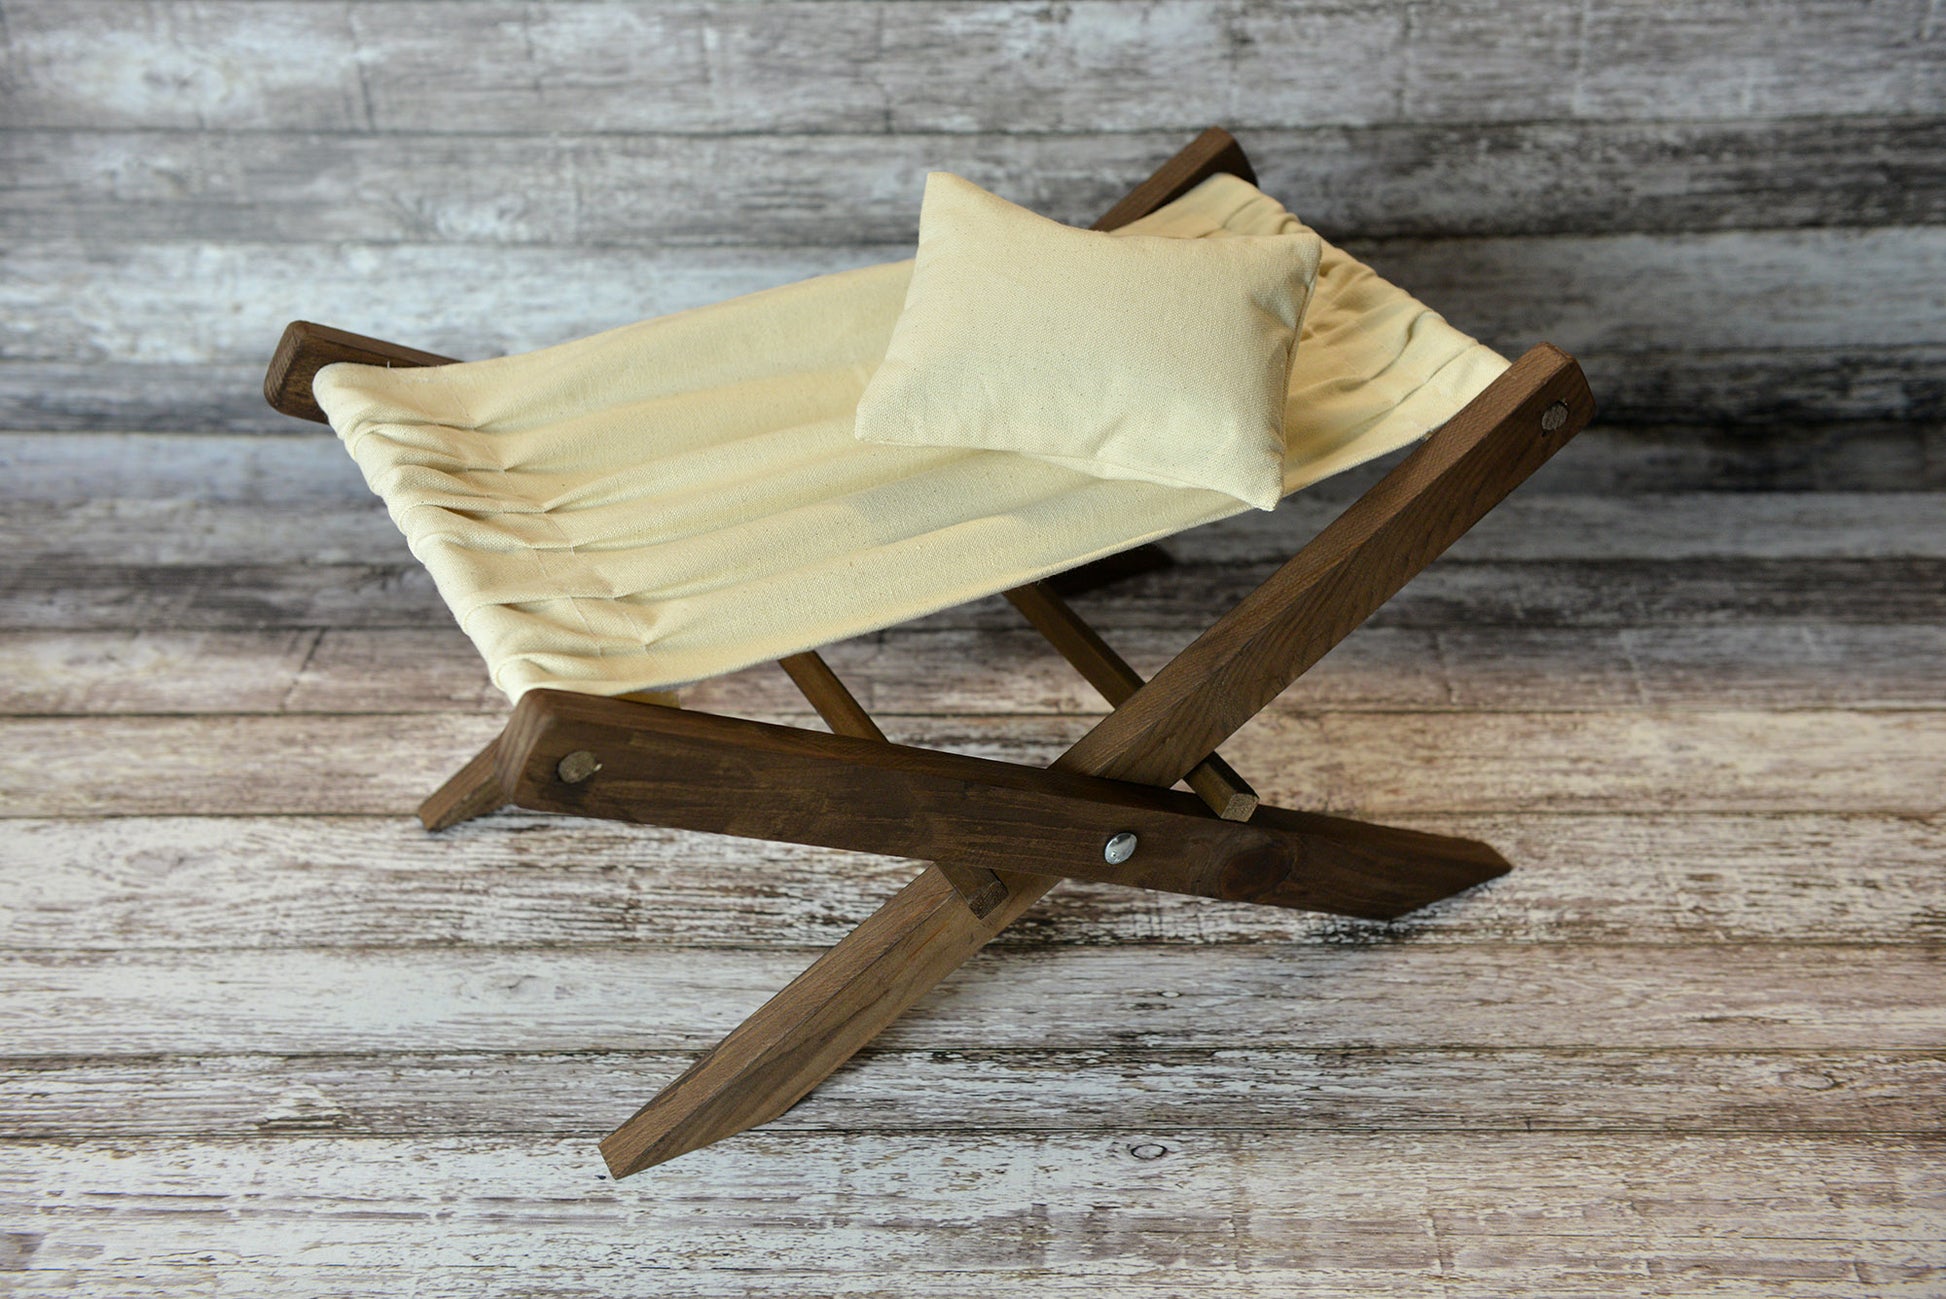 Rustic Deck Chair AND Matching Pillow - Beige Canvas - Interchangeable-Newborn Photography Props